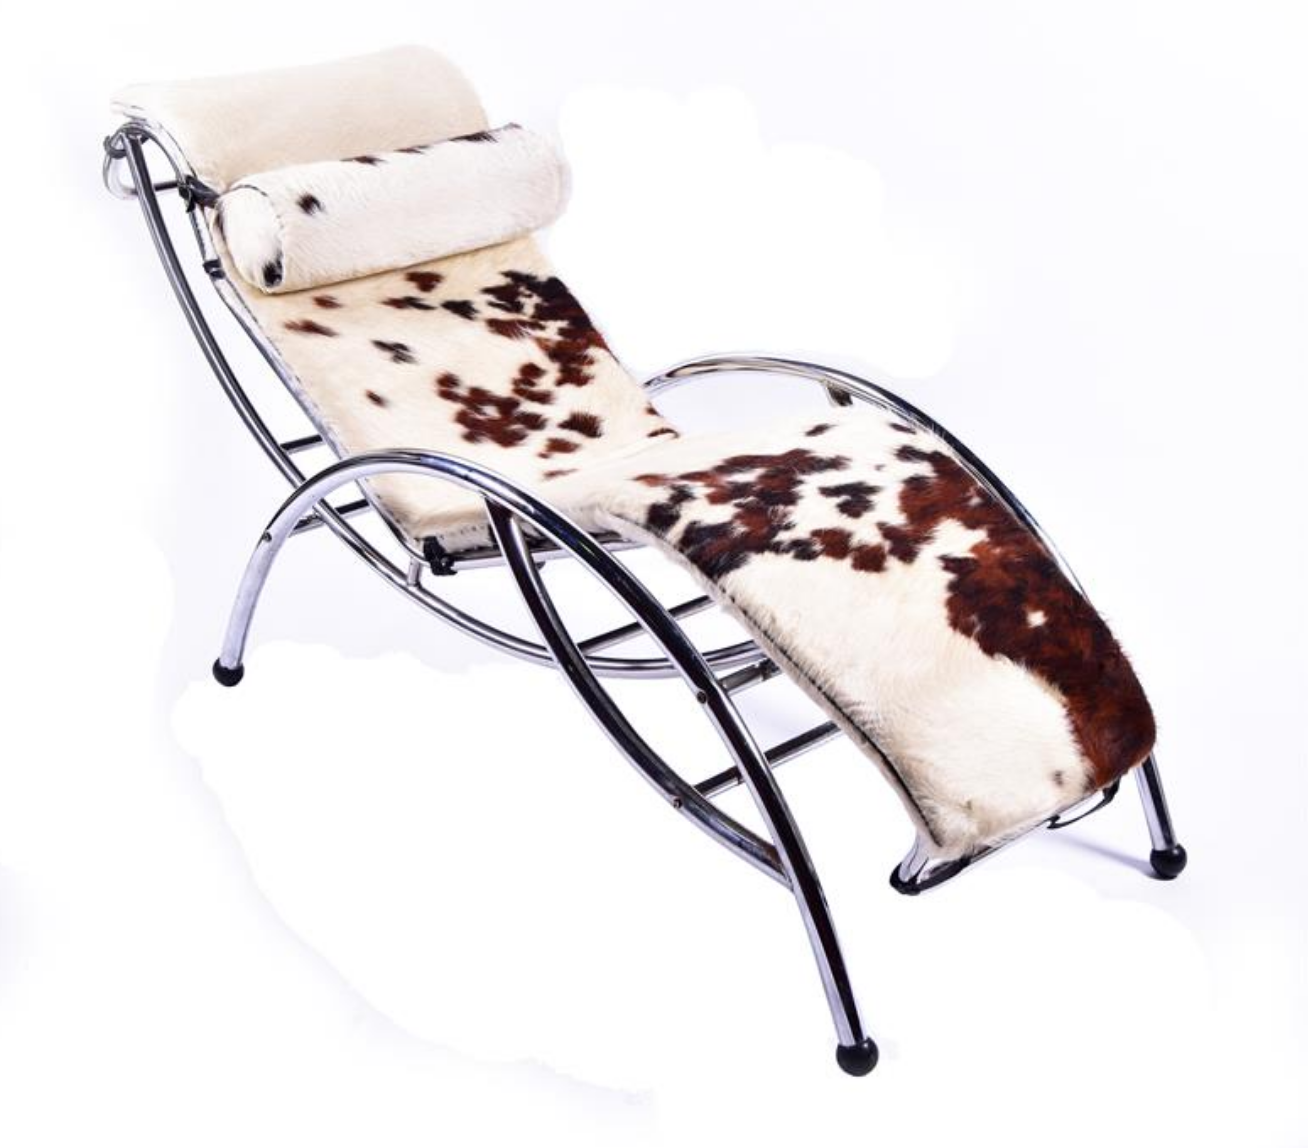 A late 20thC Modernist chrome recliner in the style of Le Corbusier - £450